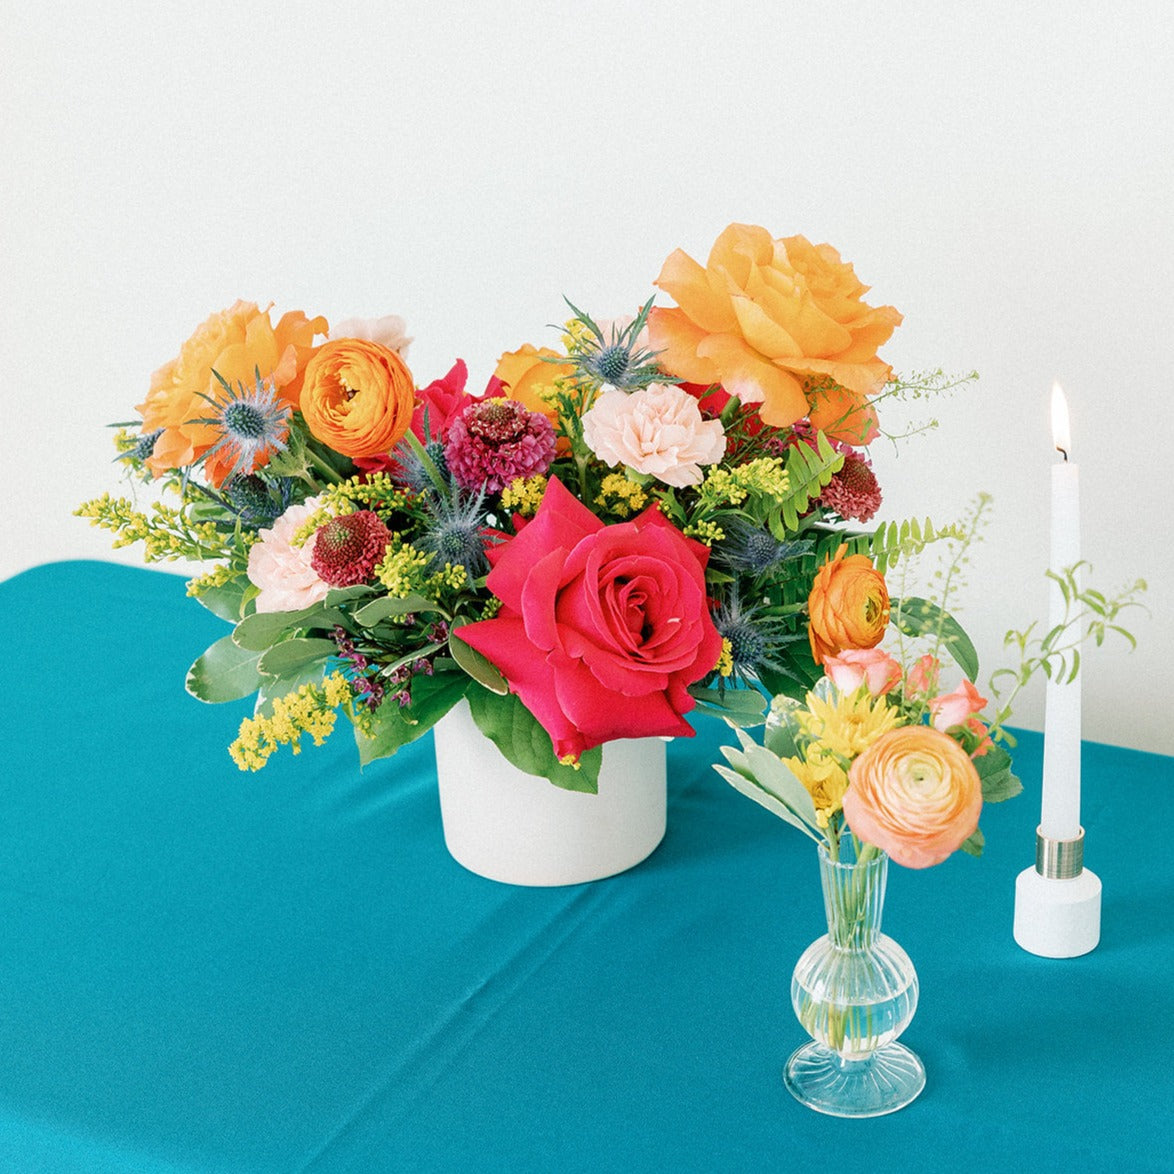 Colorful and Vibrant Wedding Centerpiece